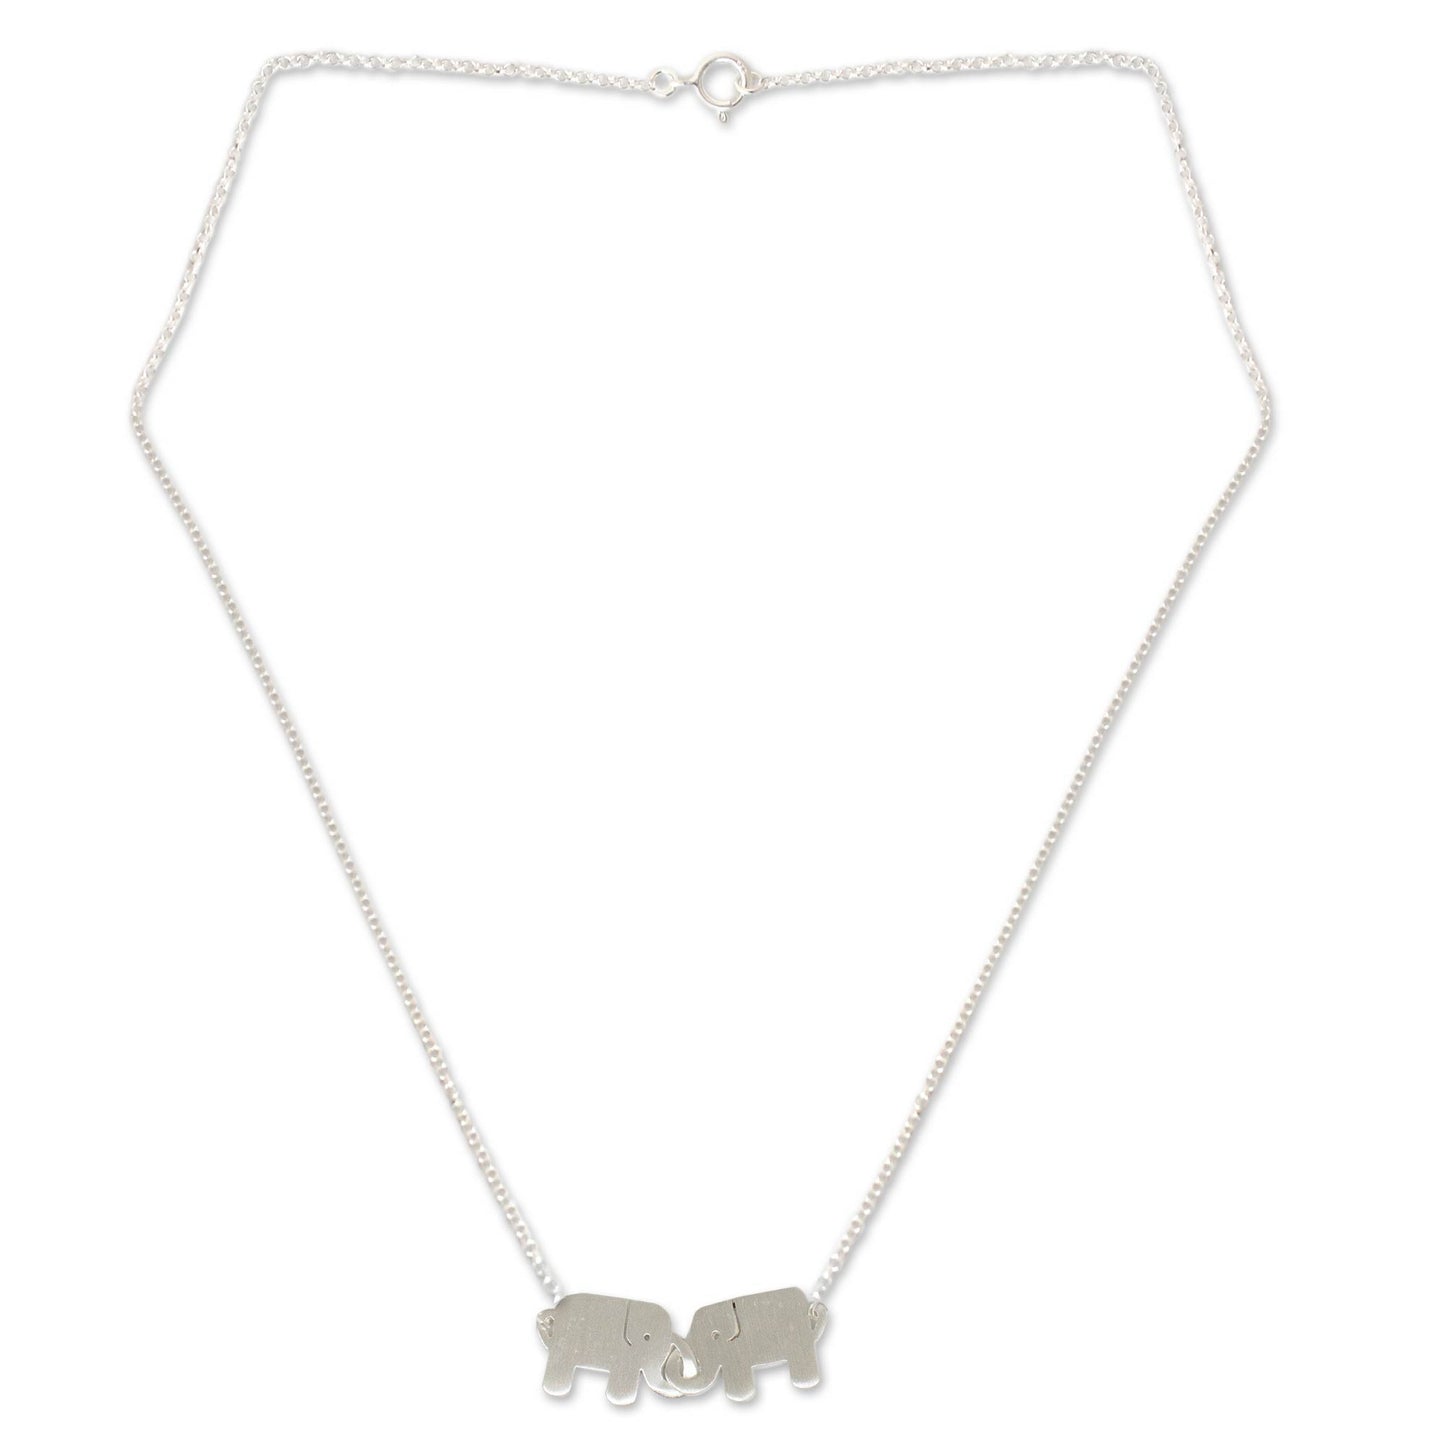 Elephant Friendship Sterling Silver Necklace